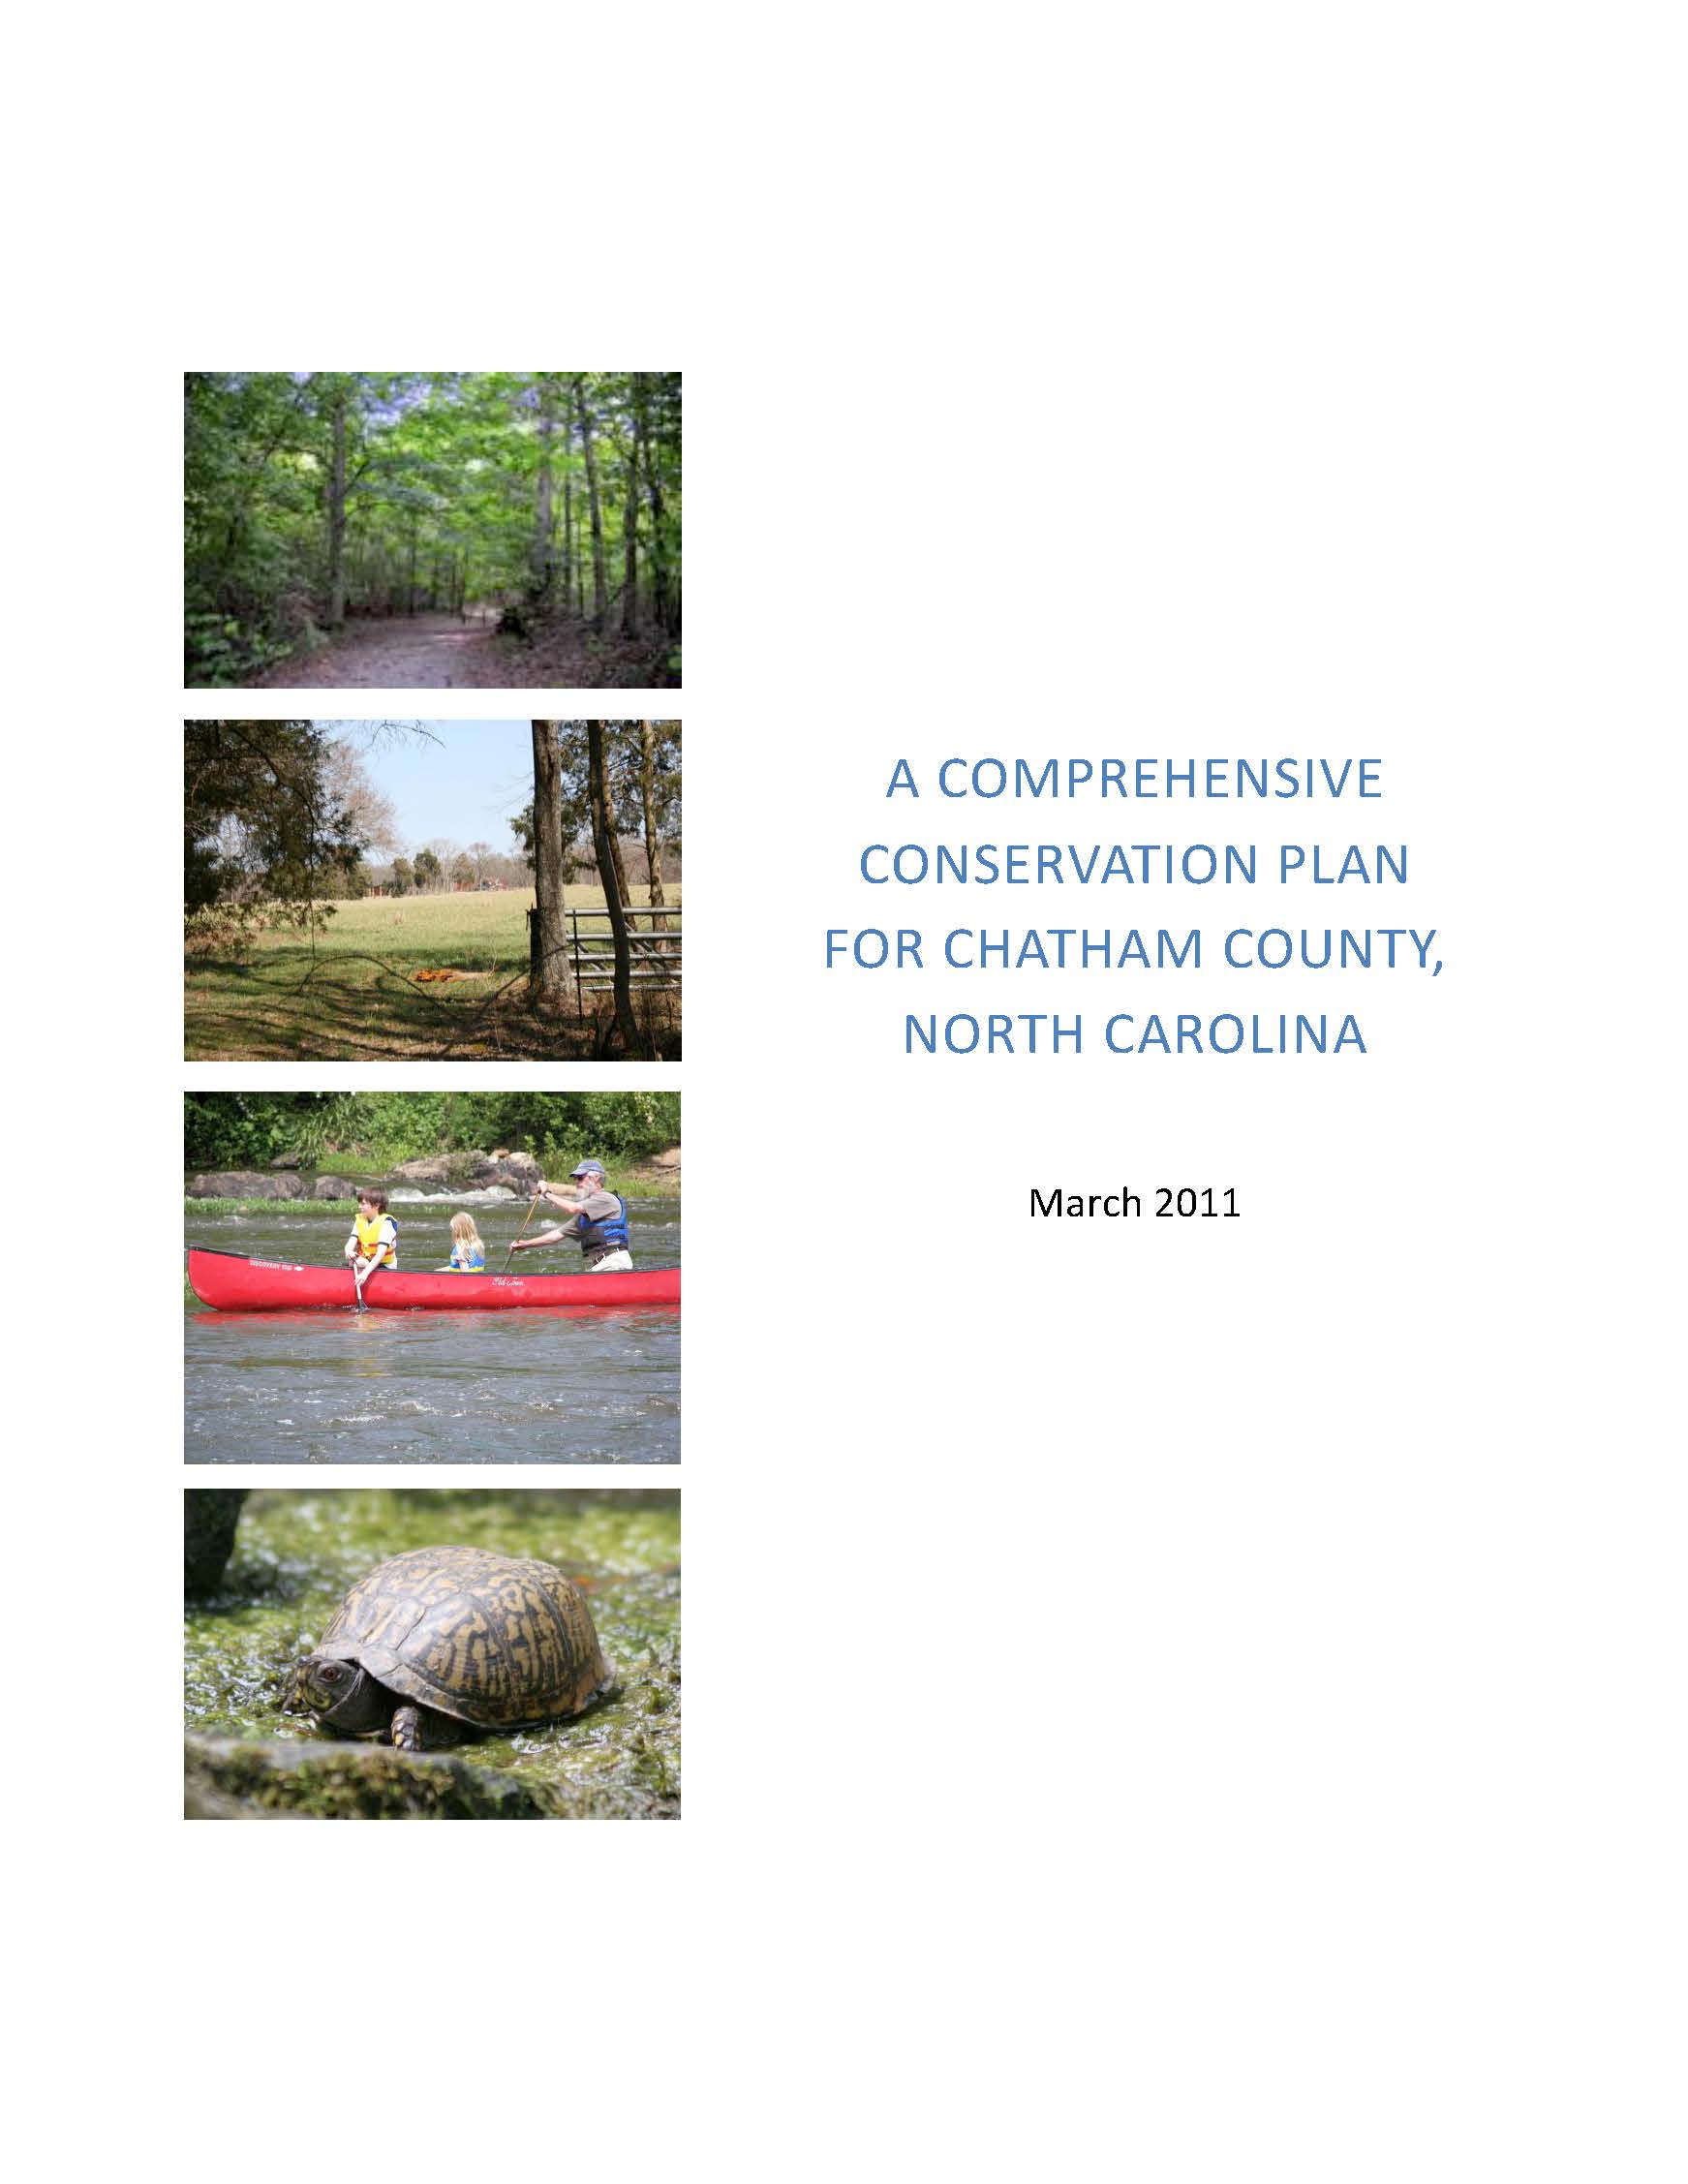 Image of the front page of the Chatham County Comprehensive Conservation Plan.